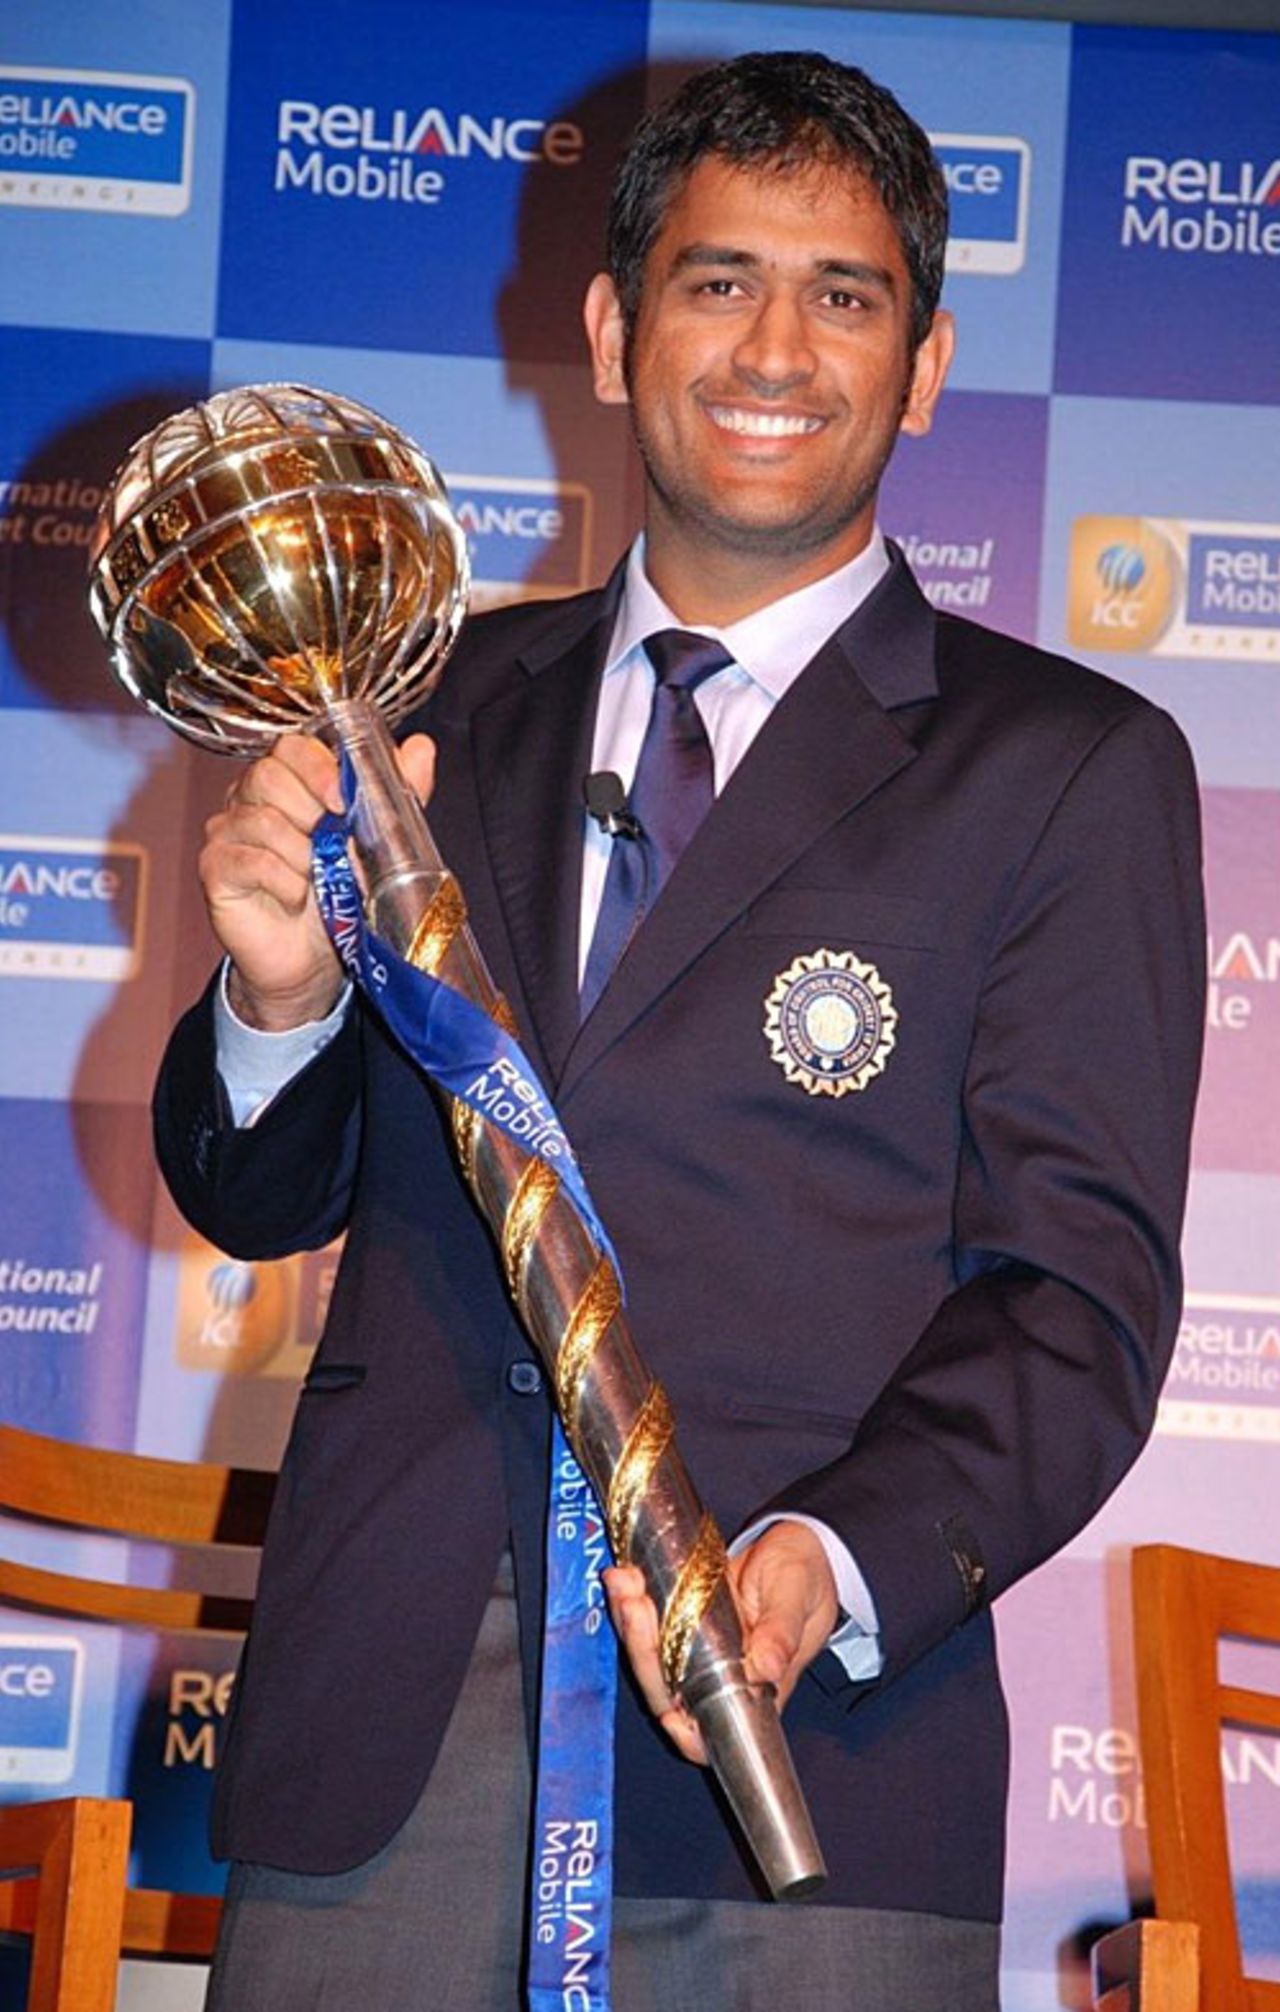 MS Dhoni proudly displays the ICC Test Championship mace, New Delhi, December 27, 2009